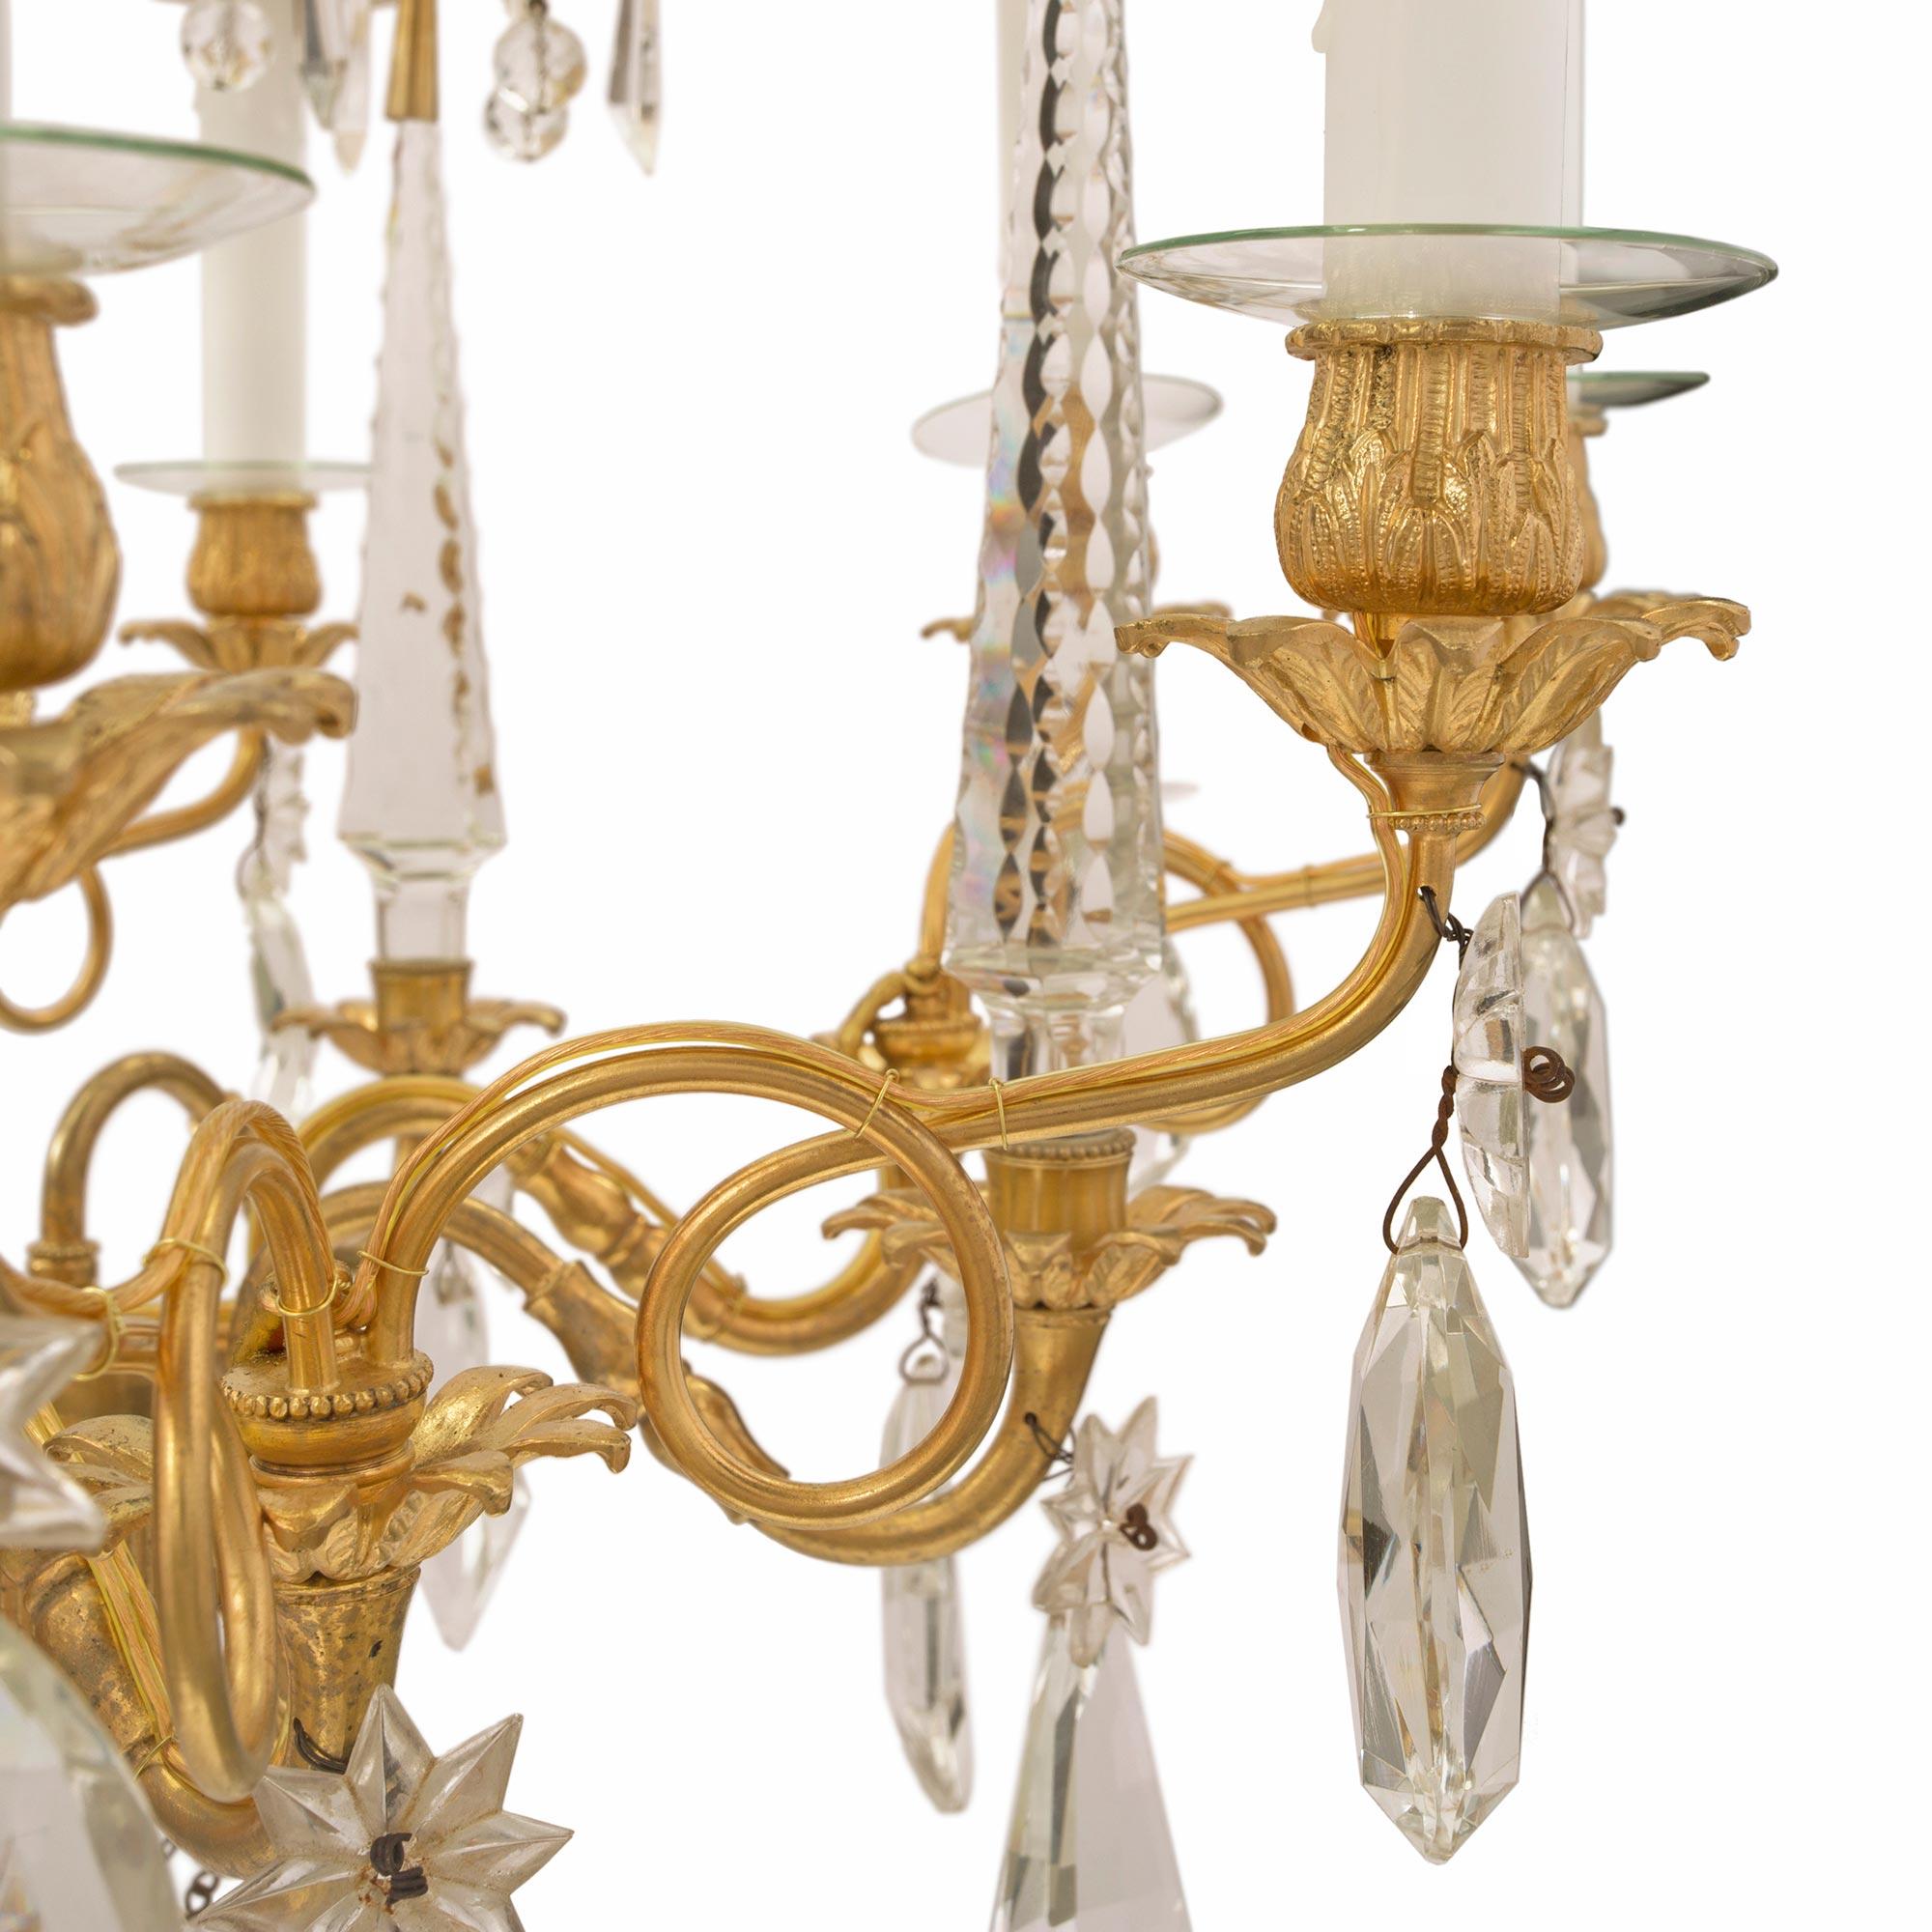 Russian 19th Century Neoclassical Style Ormolu and Crystal Chandelier For Sale 2